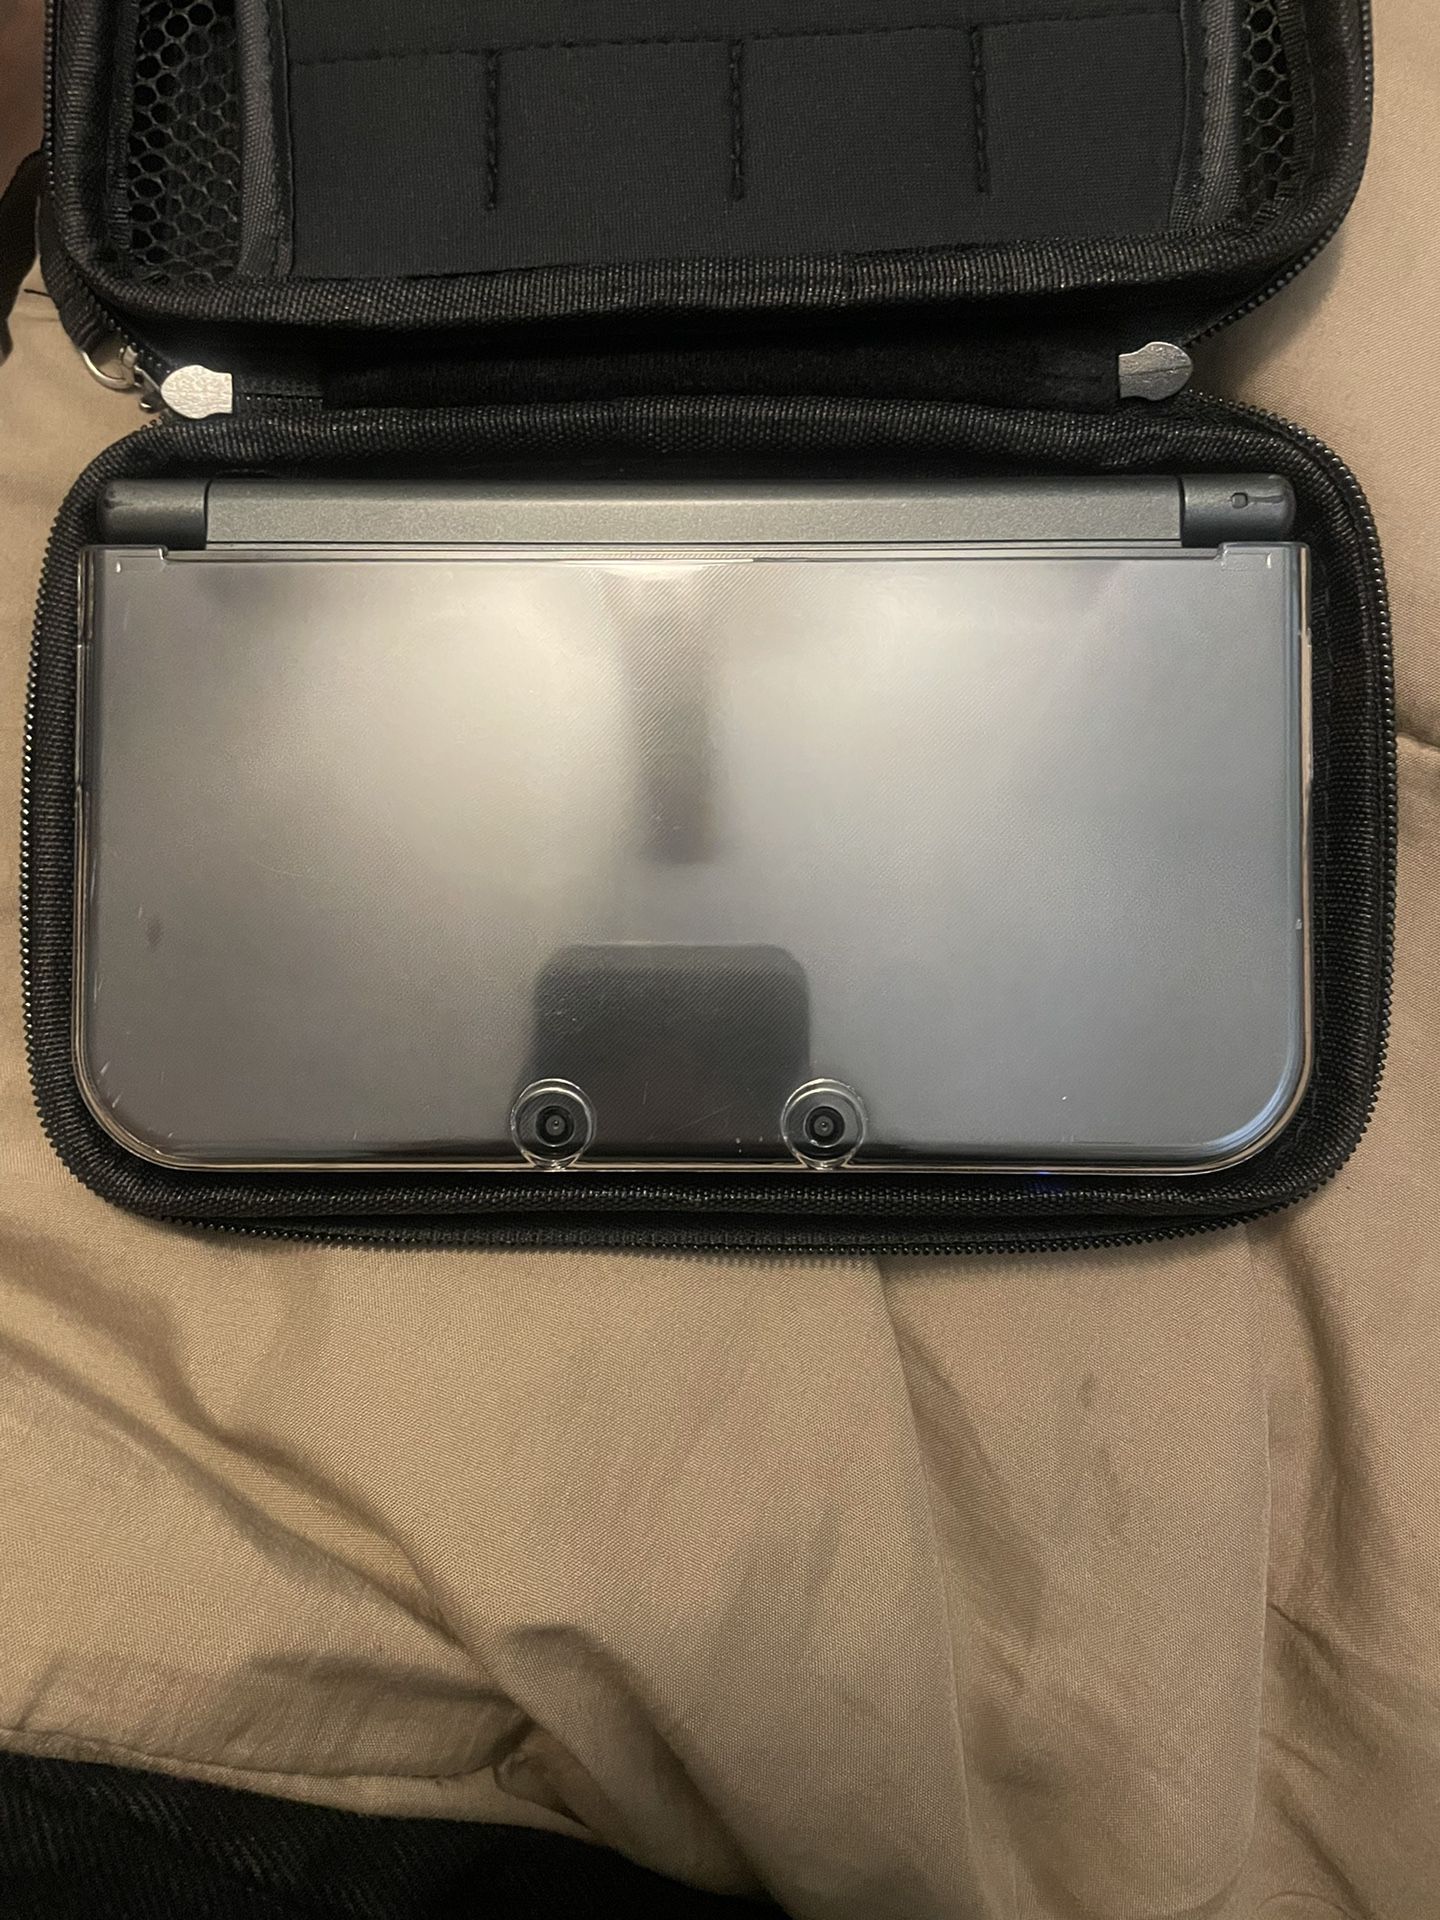 New Nintendo 3ds XL (Hacked)